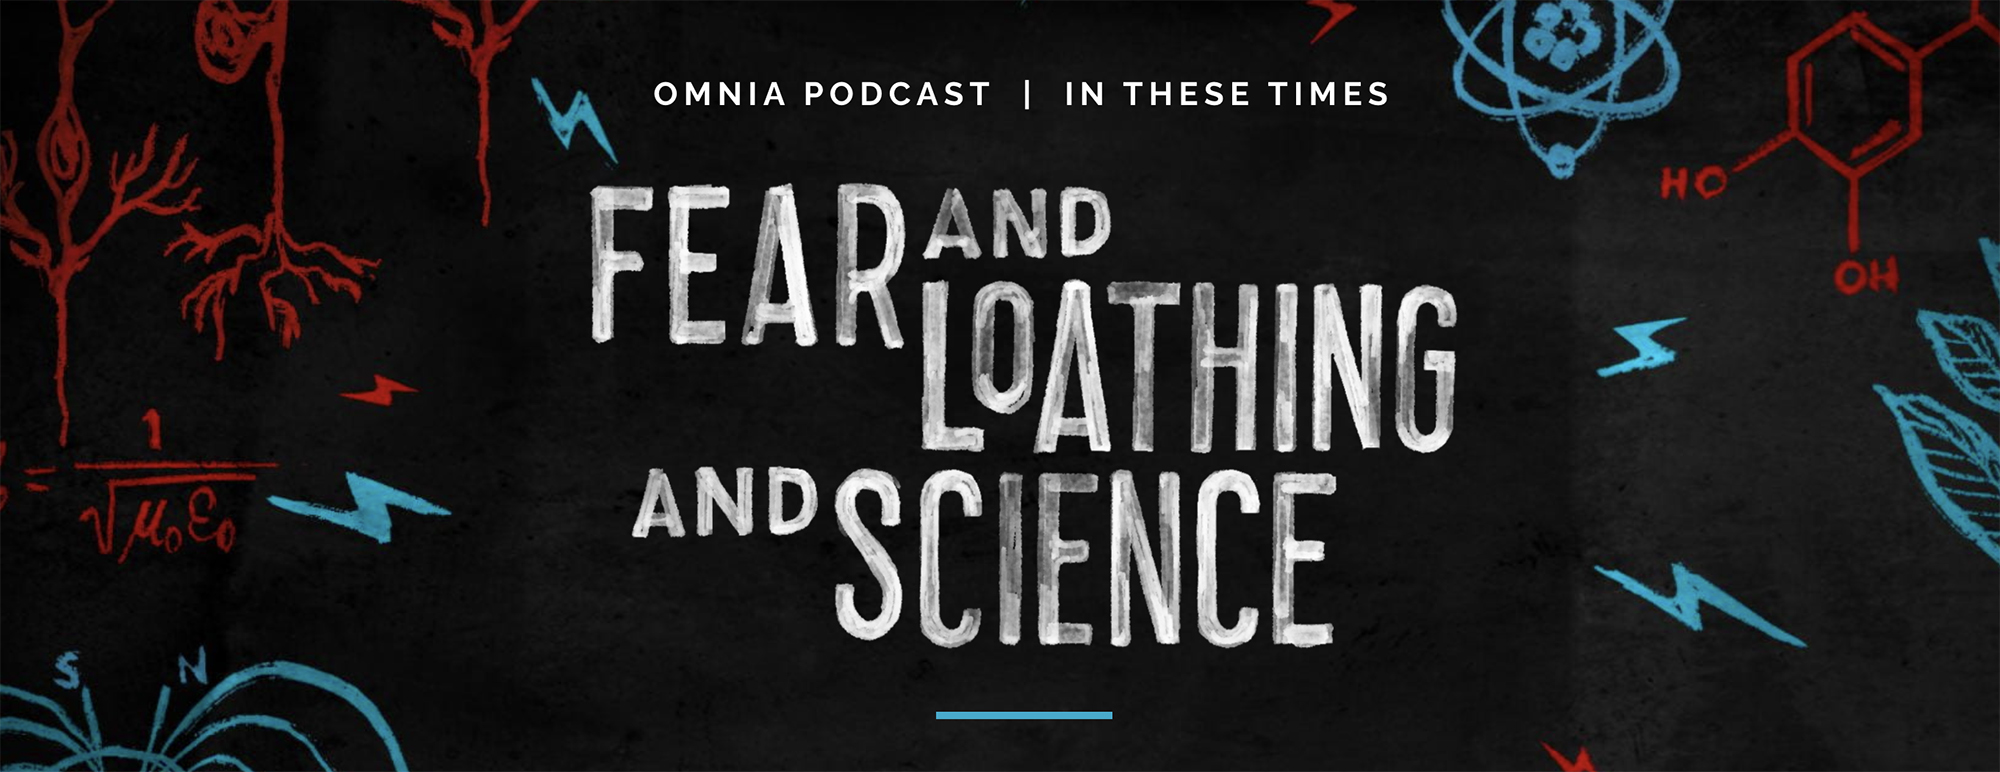 Podcast cover art for Fear and Loathing and Science.